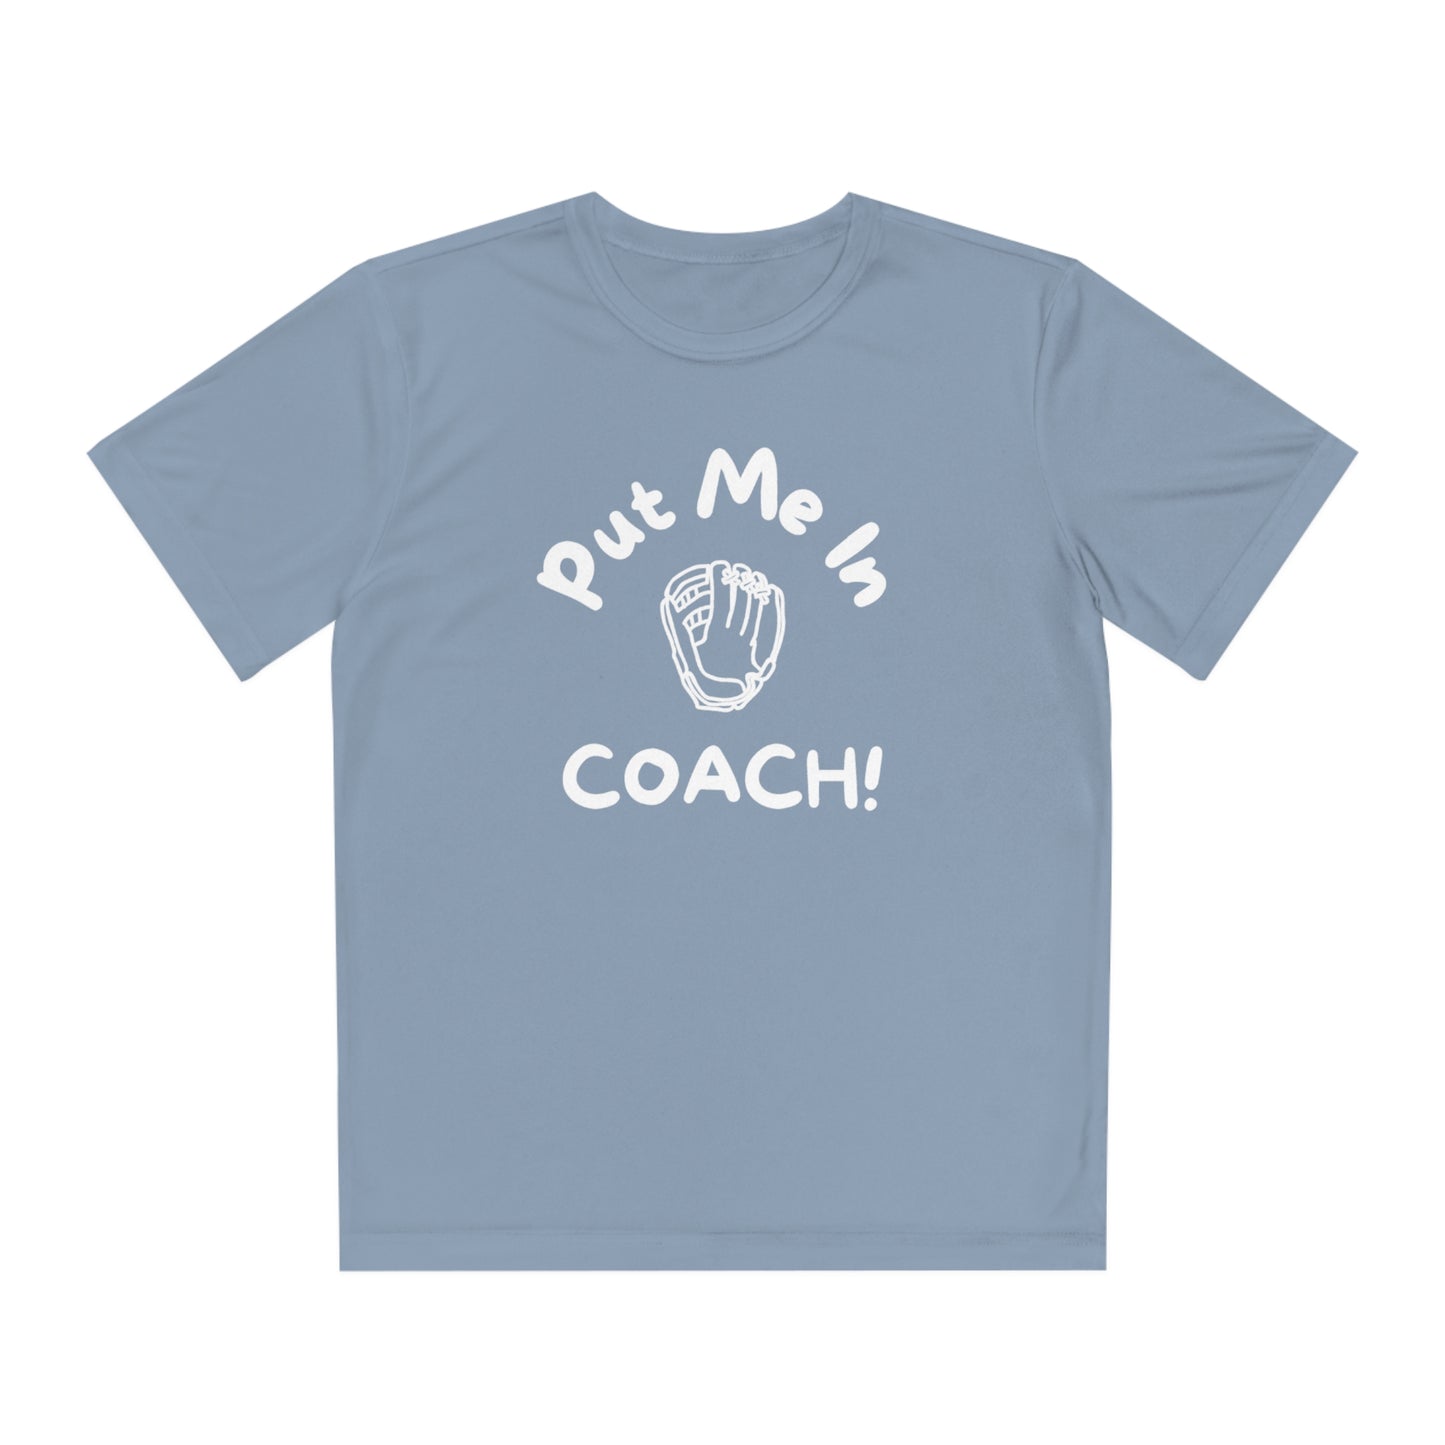 Put Me In Coach Youth Competitor Tee